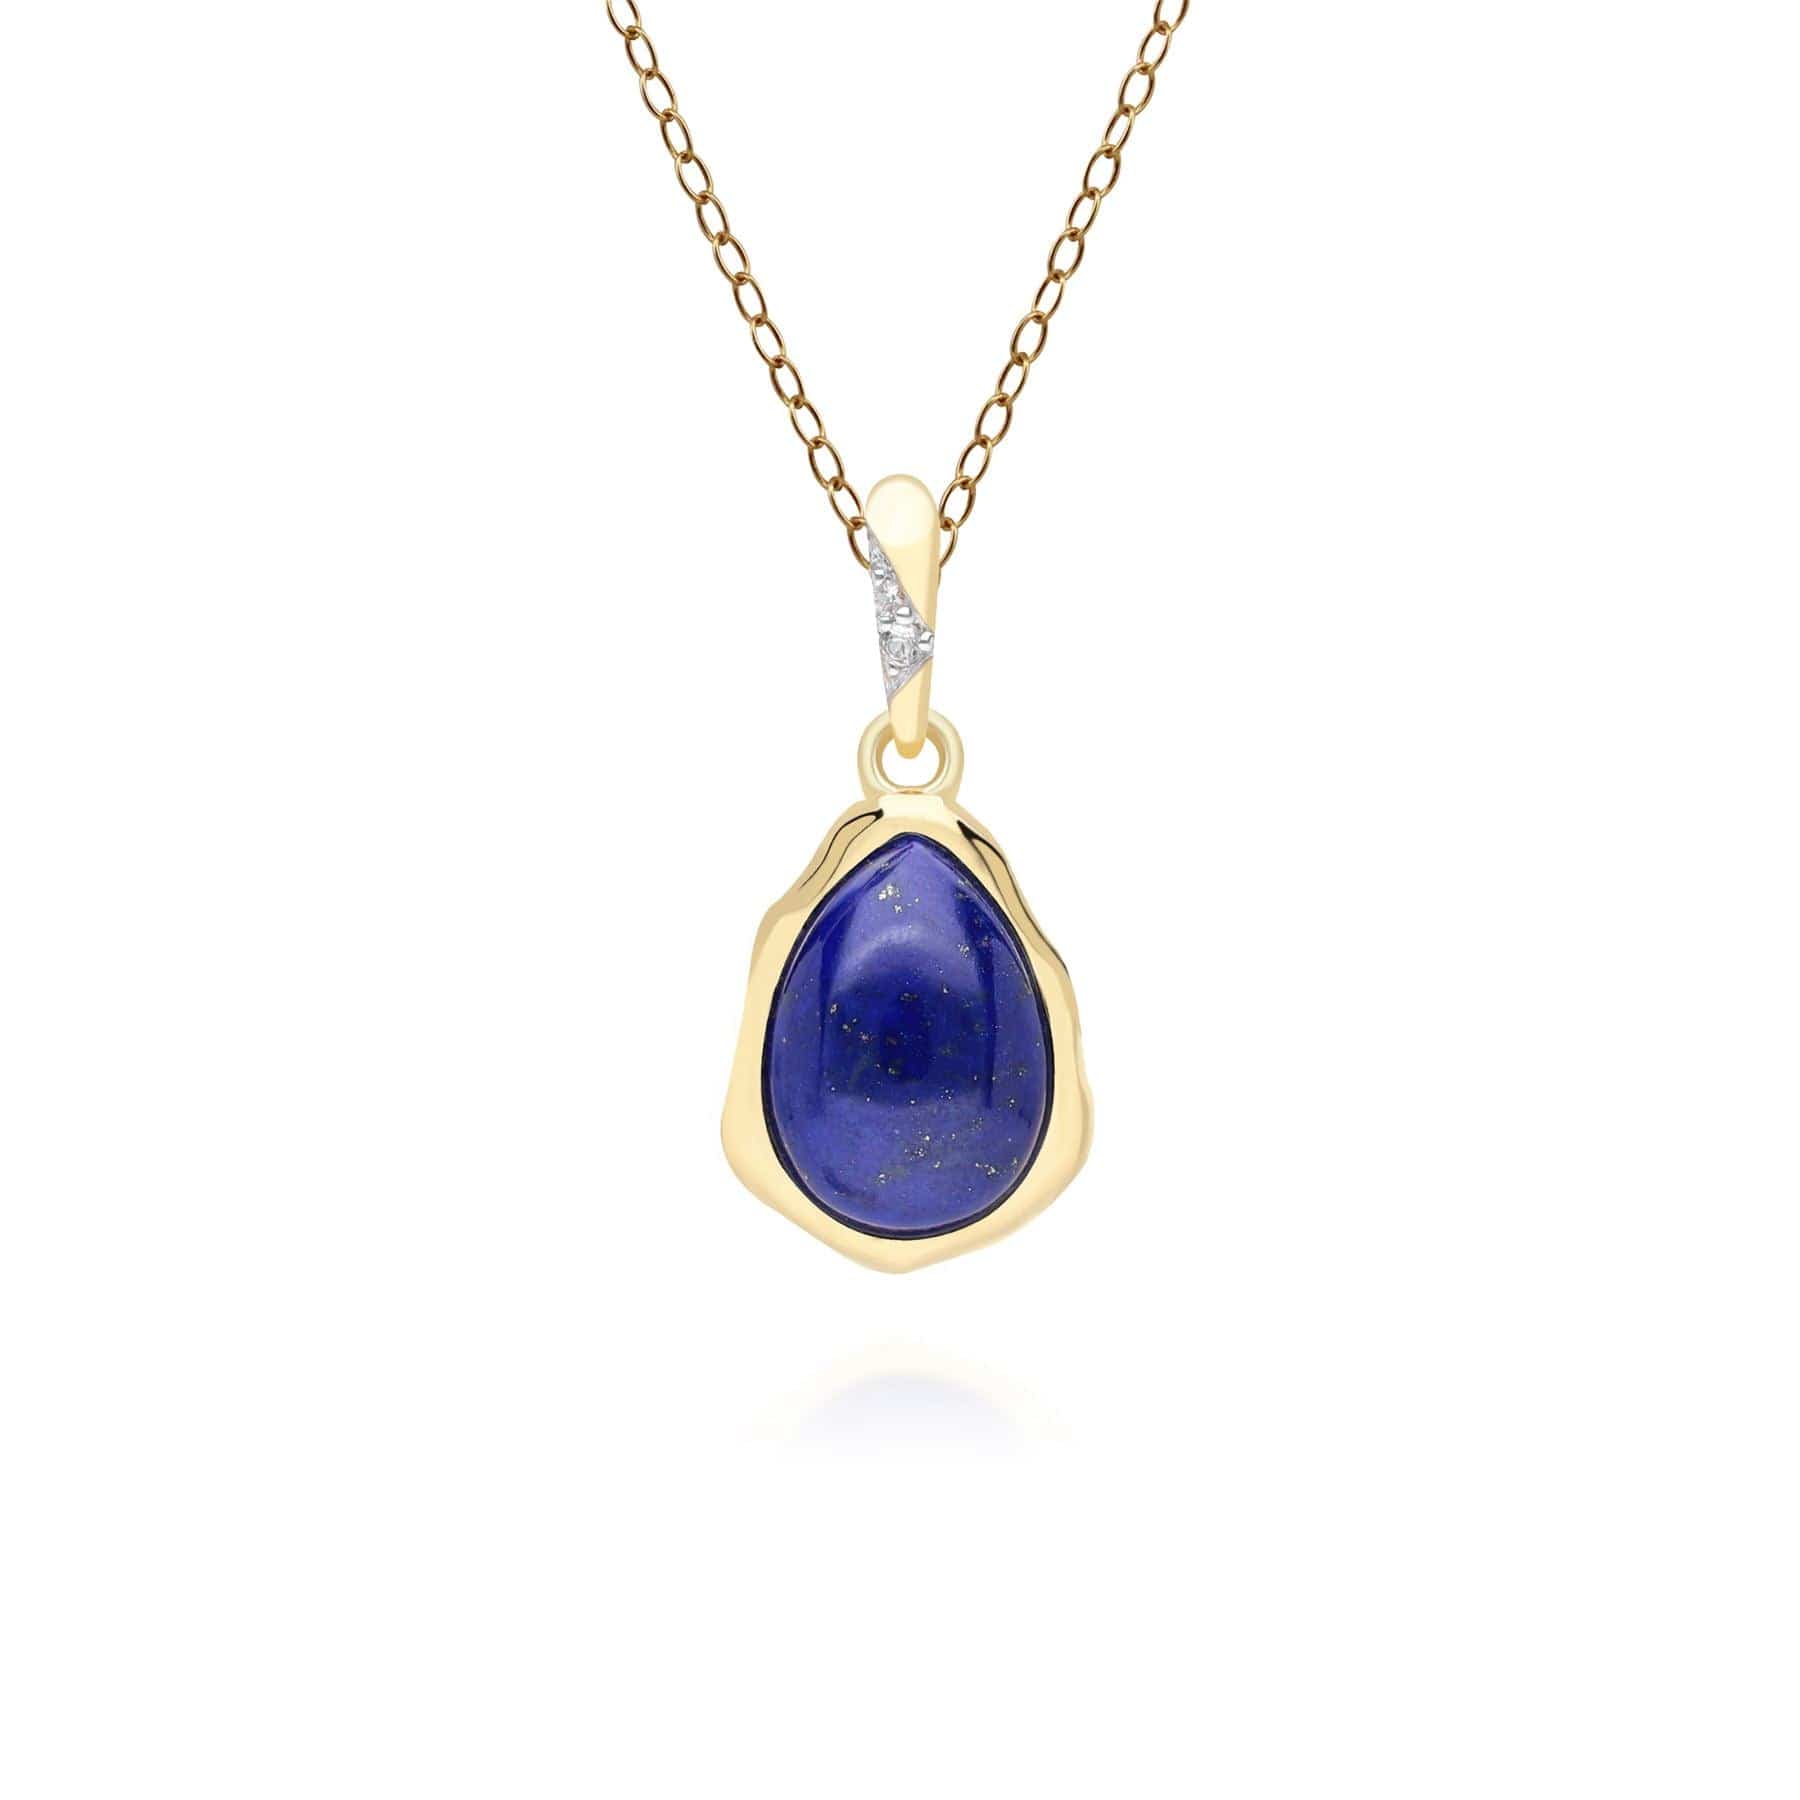 Irregular Lapis Lazuli & Topaz Pendant In 18ct Gold Plated SterlIng Silver